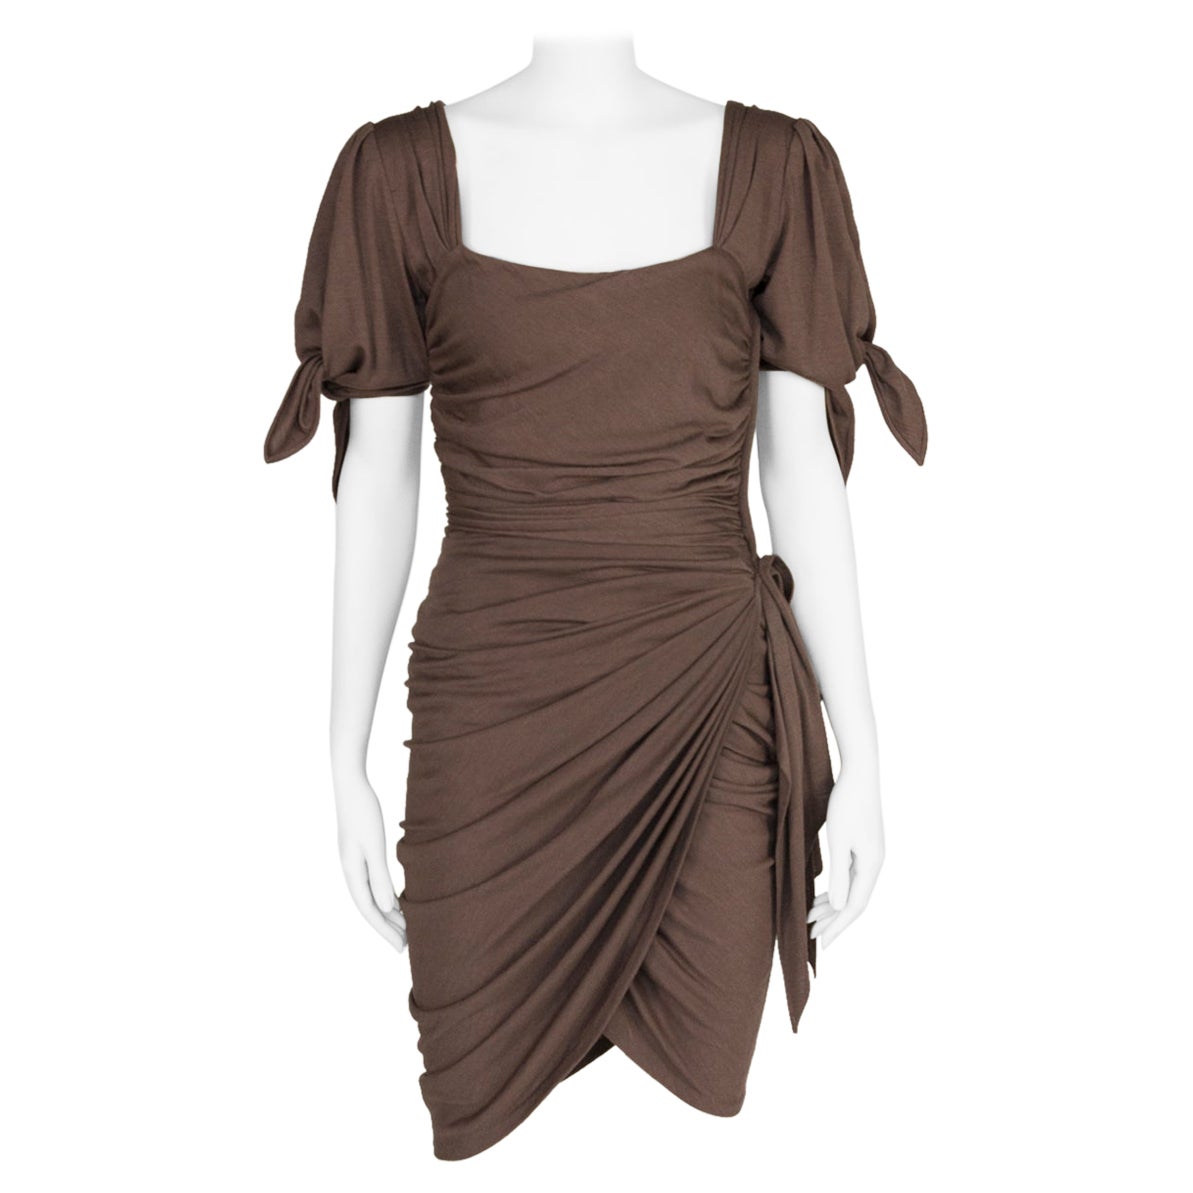 Emanuel Ungaro Draped Knotted Cut-Out Cocktail Dress, Circa 1985 For Sale